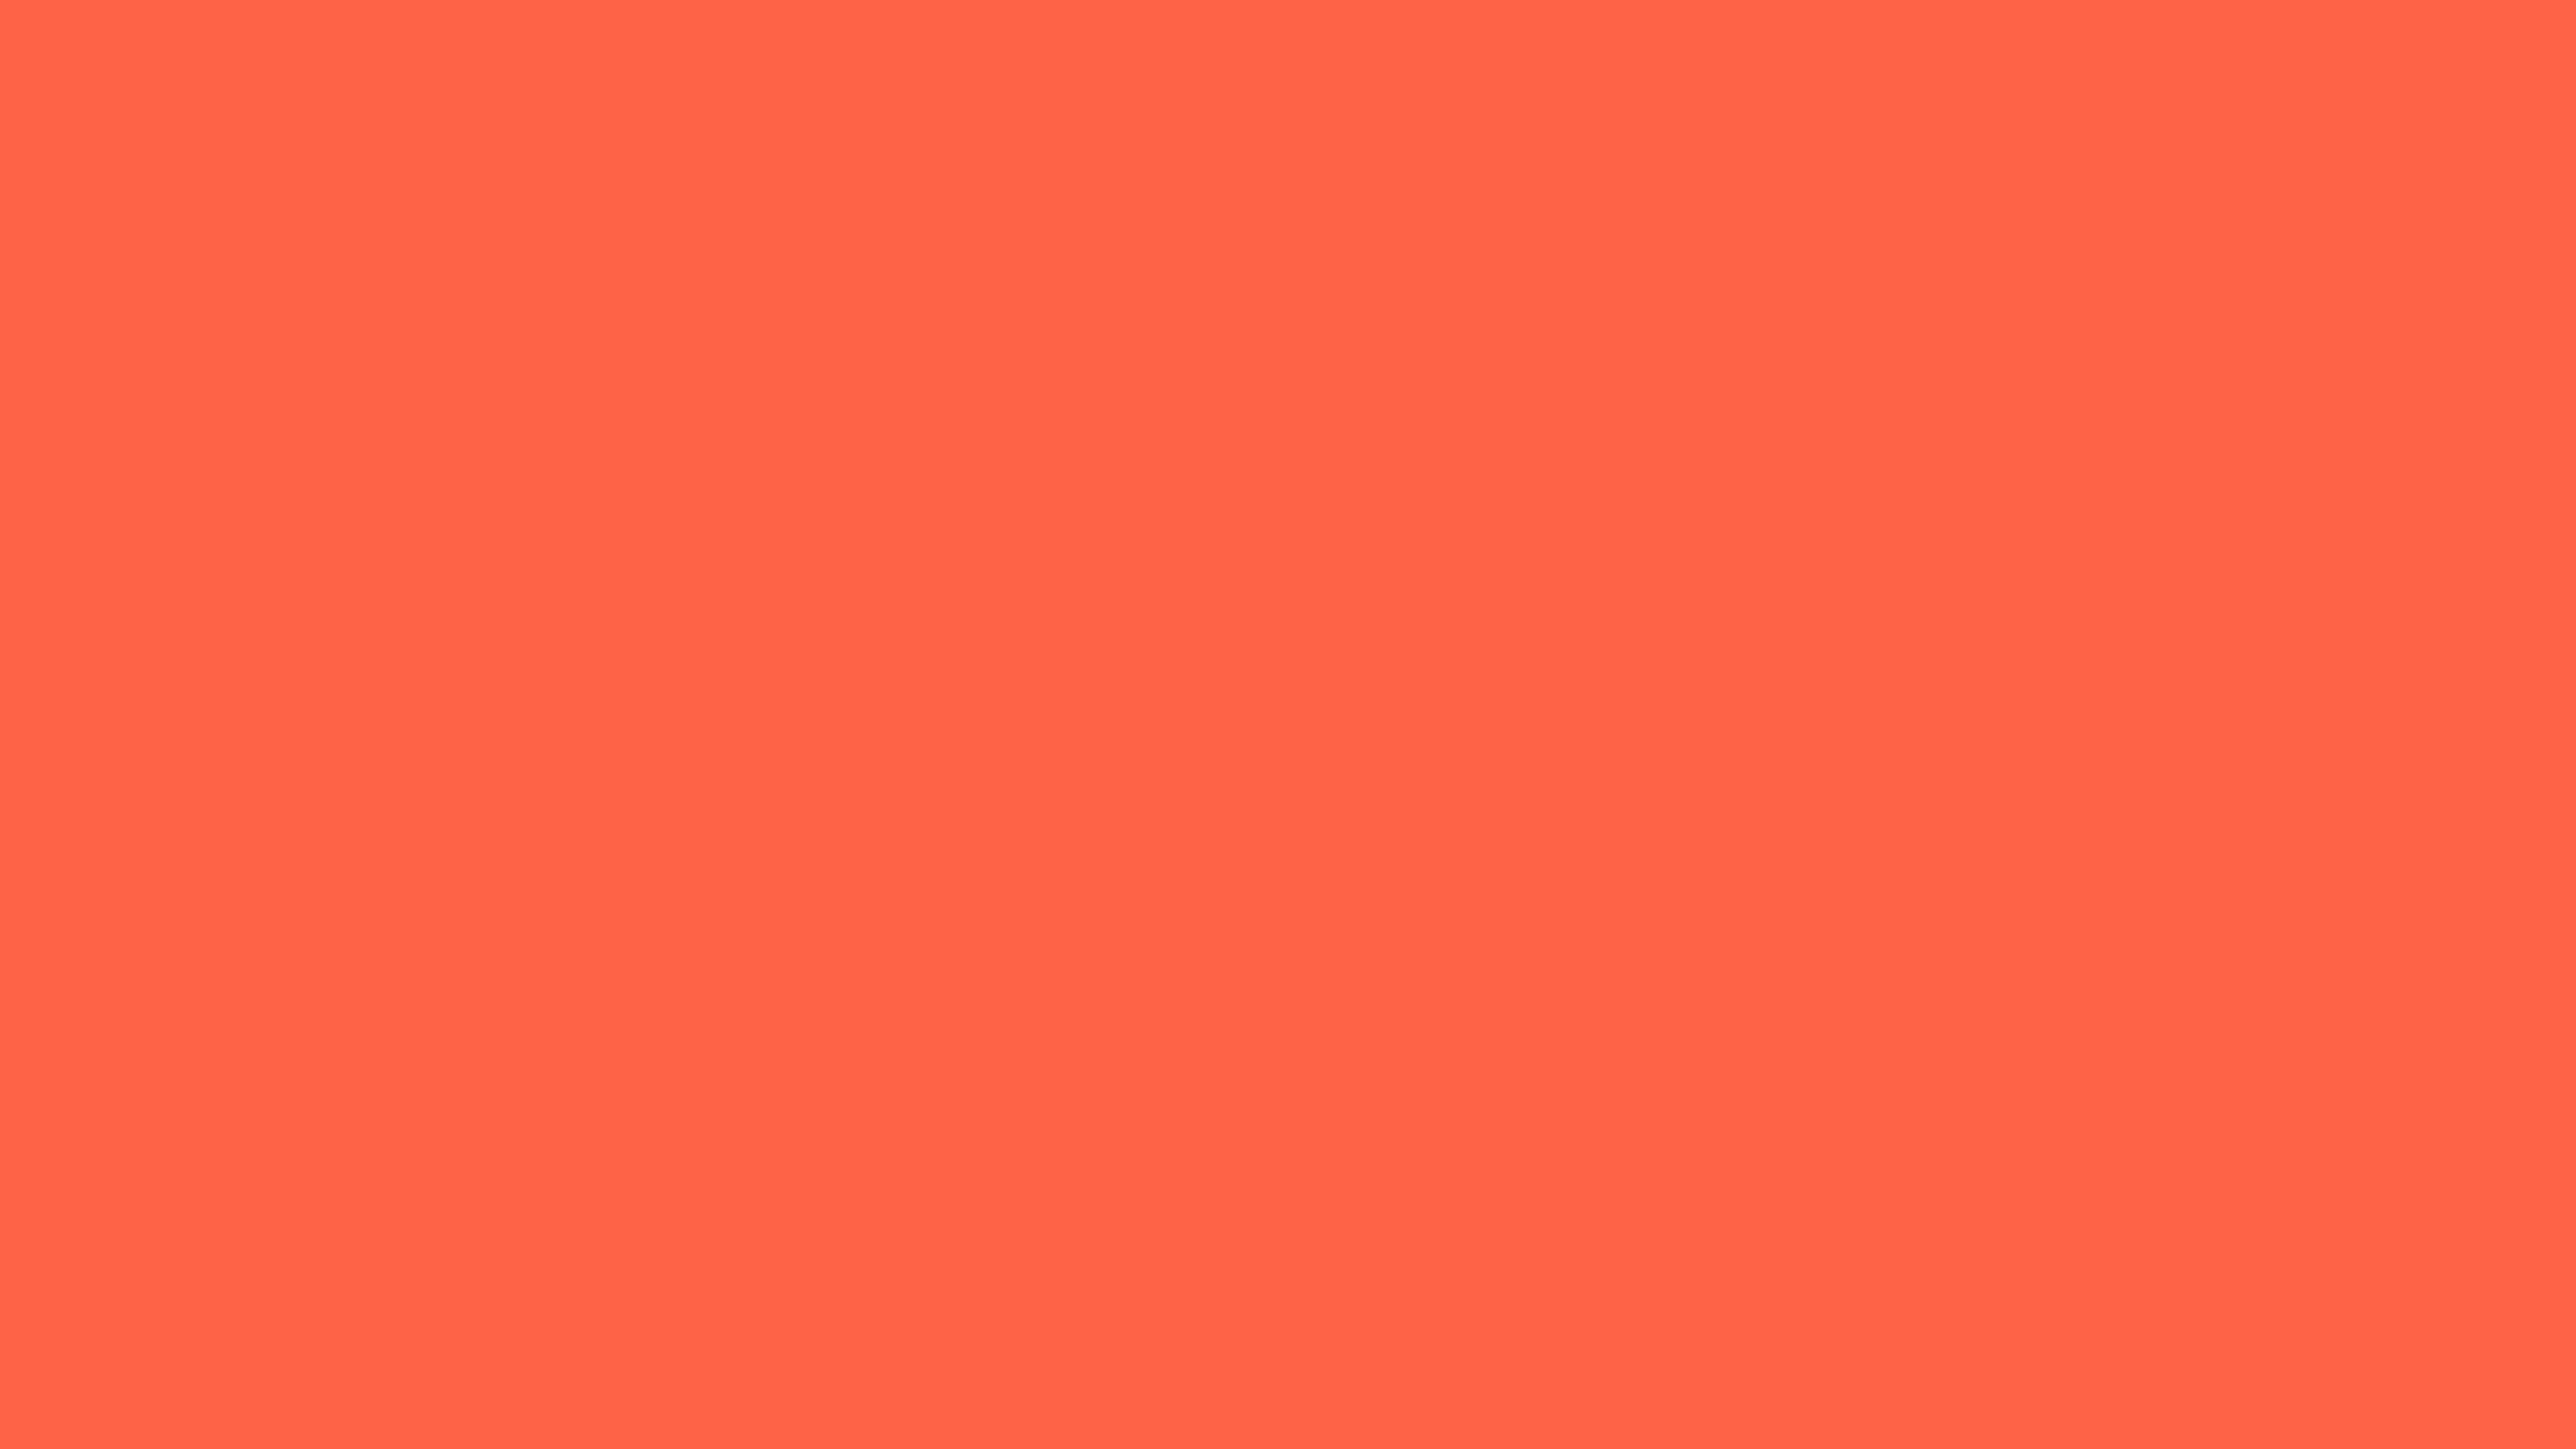 7680x4320 Tomato Solid Color Background